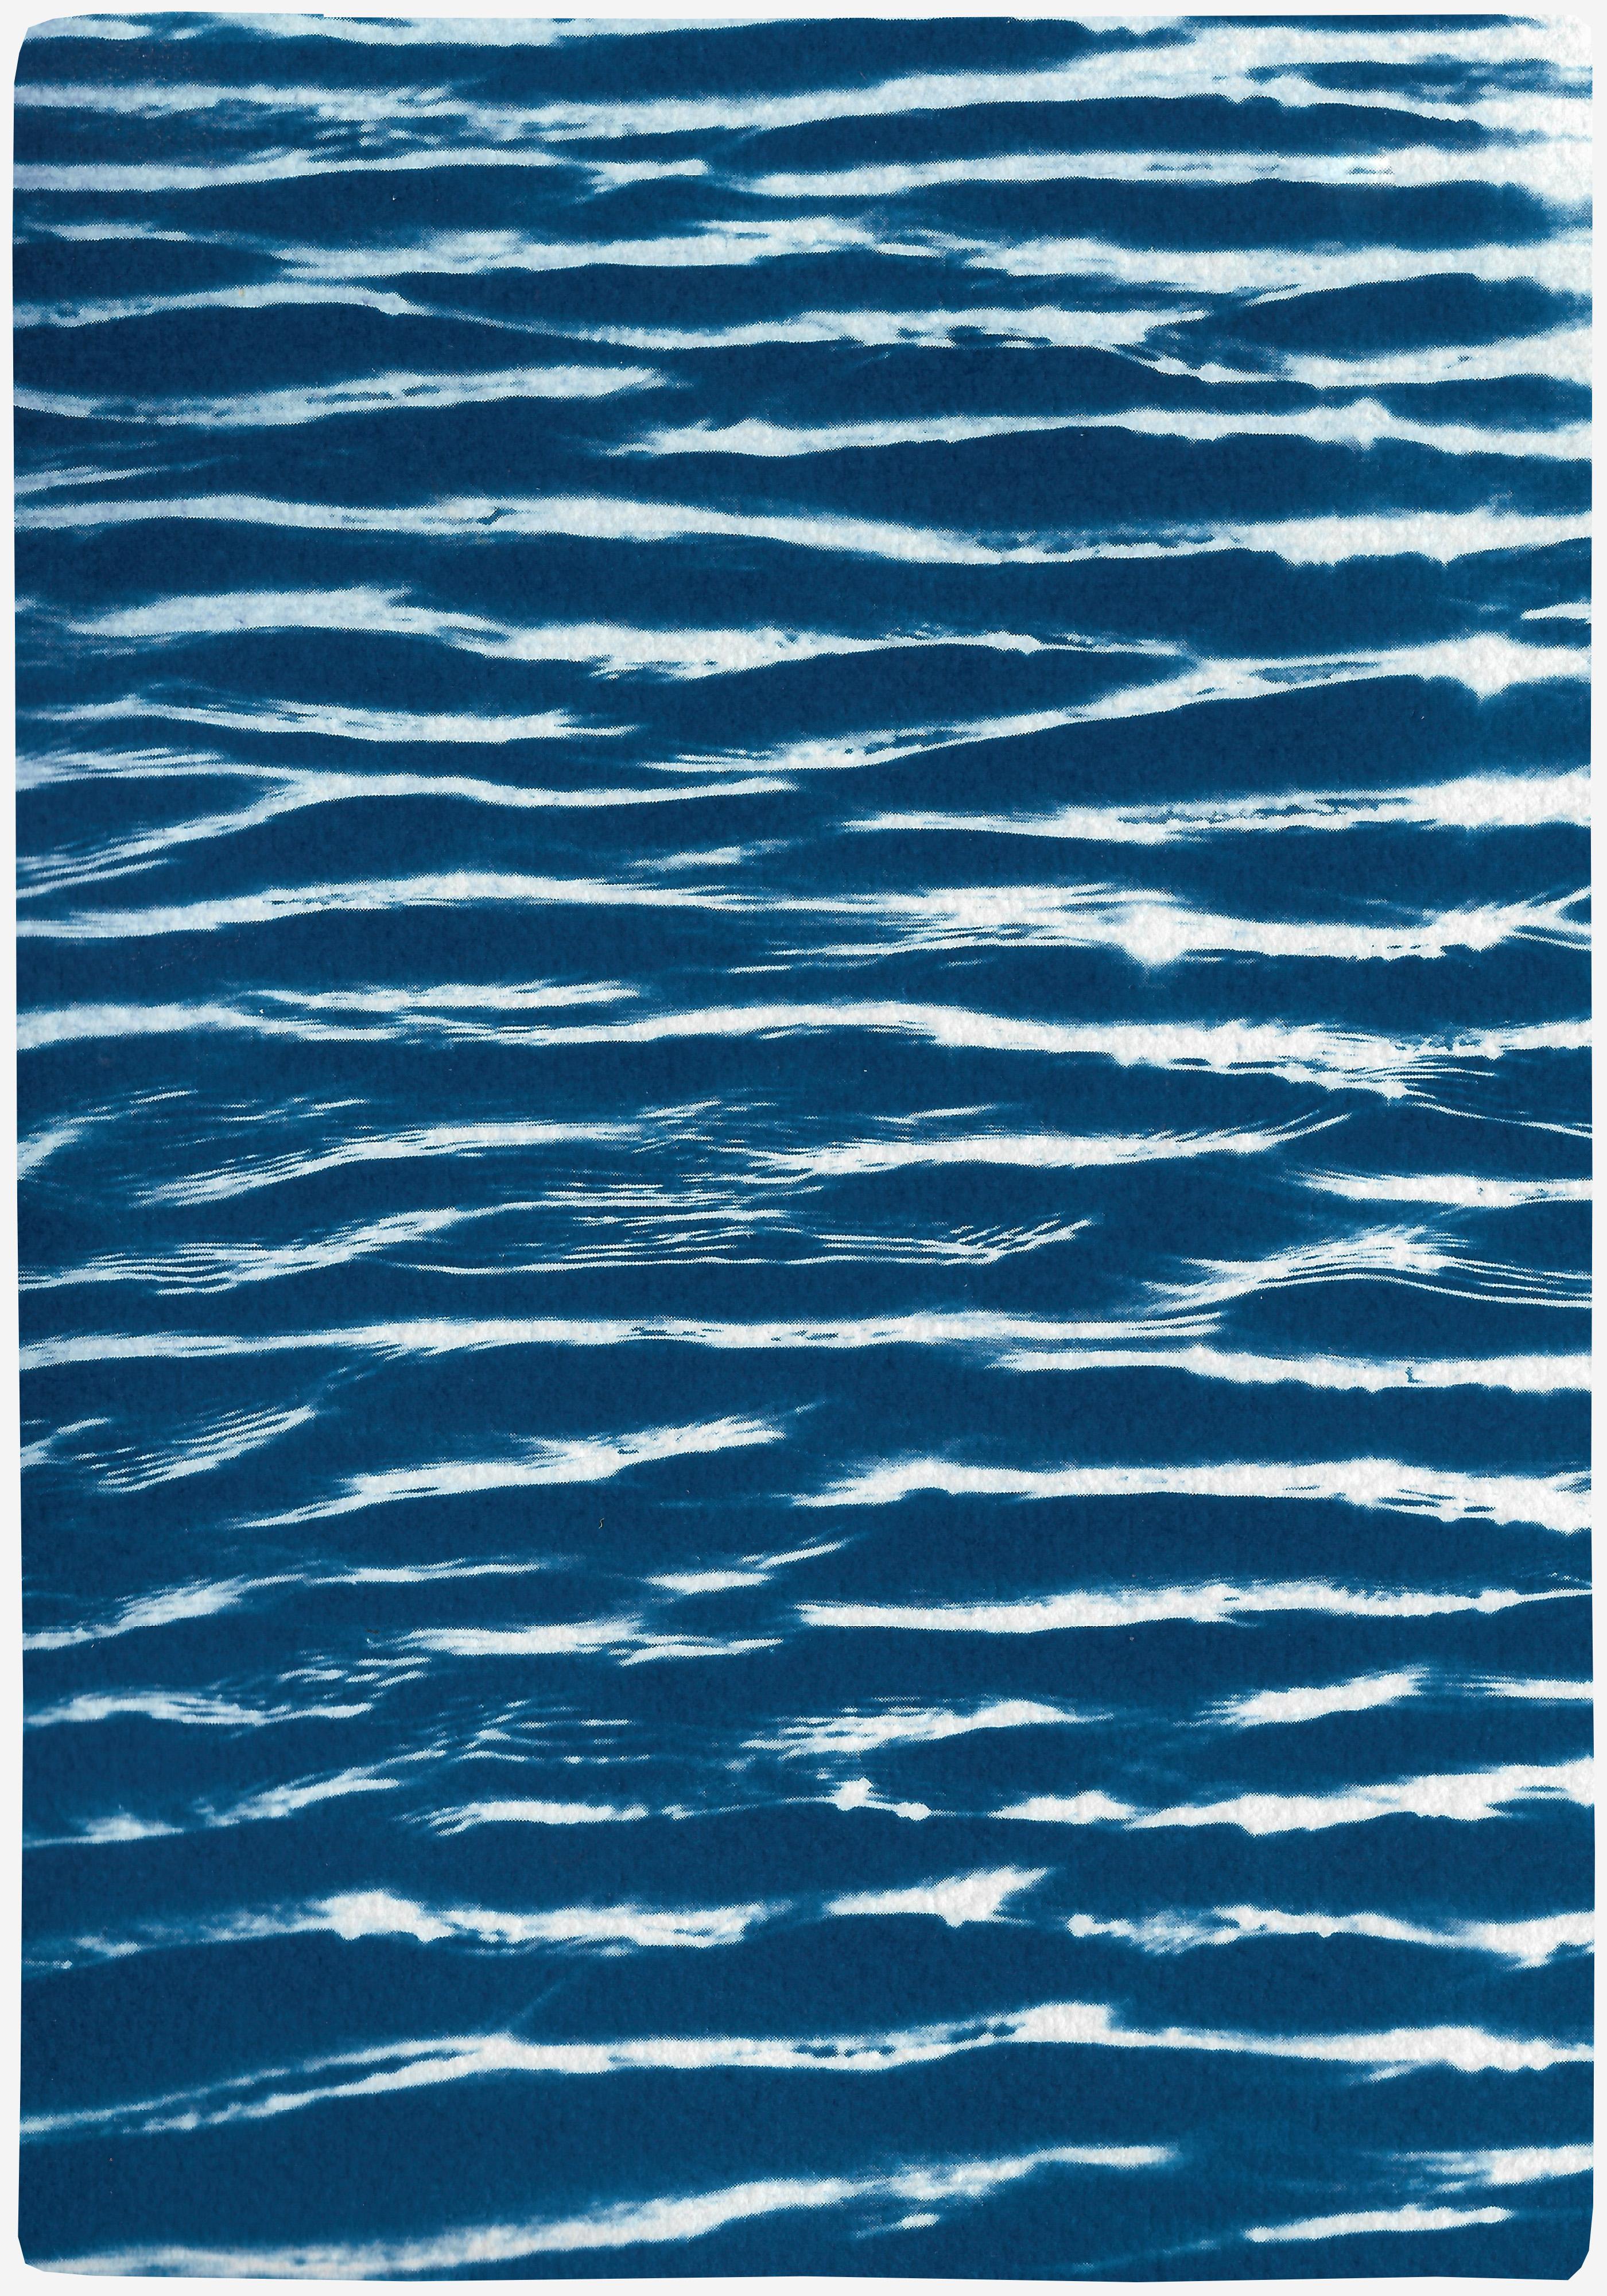 This is an exclusive handprinted limited edition cyanotype.

This beautiful diptych is titled 